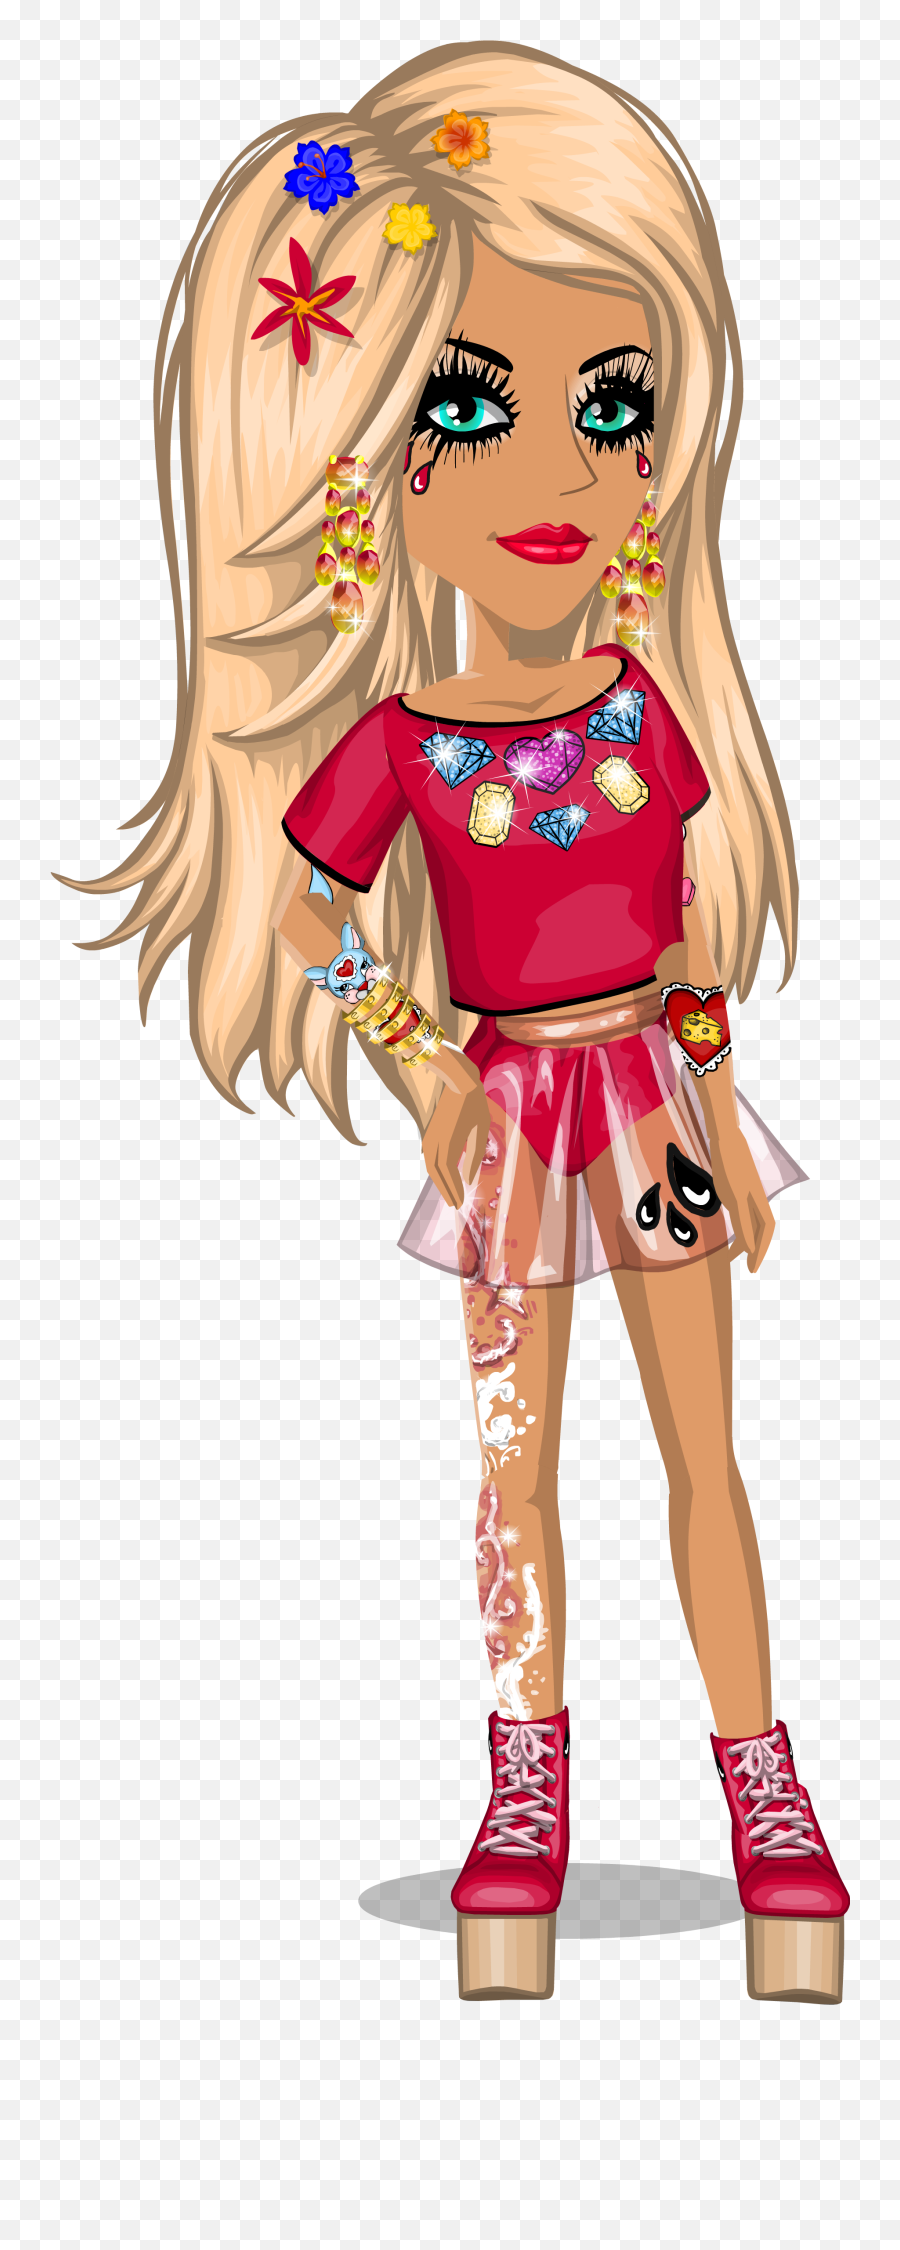 Download Hd Msp December Png Roxy - Fictional Character,December Png